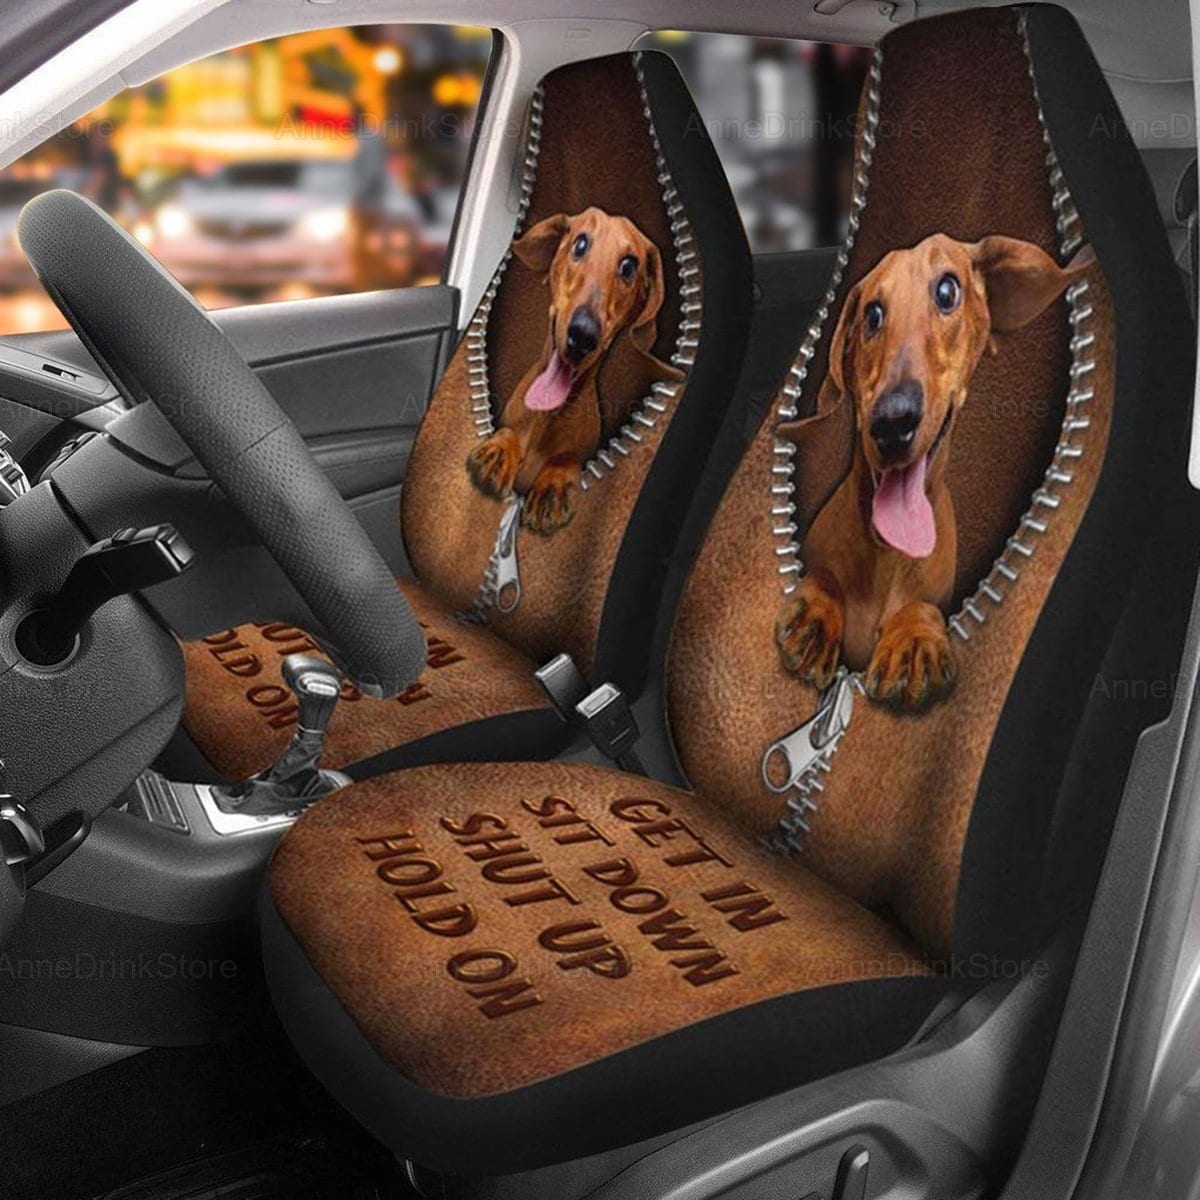 Dachshund Car Seat Covers, Gift For Him, Dachshund Seat Covers